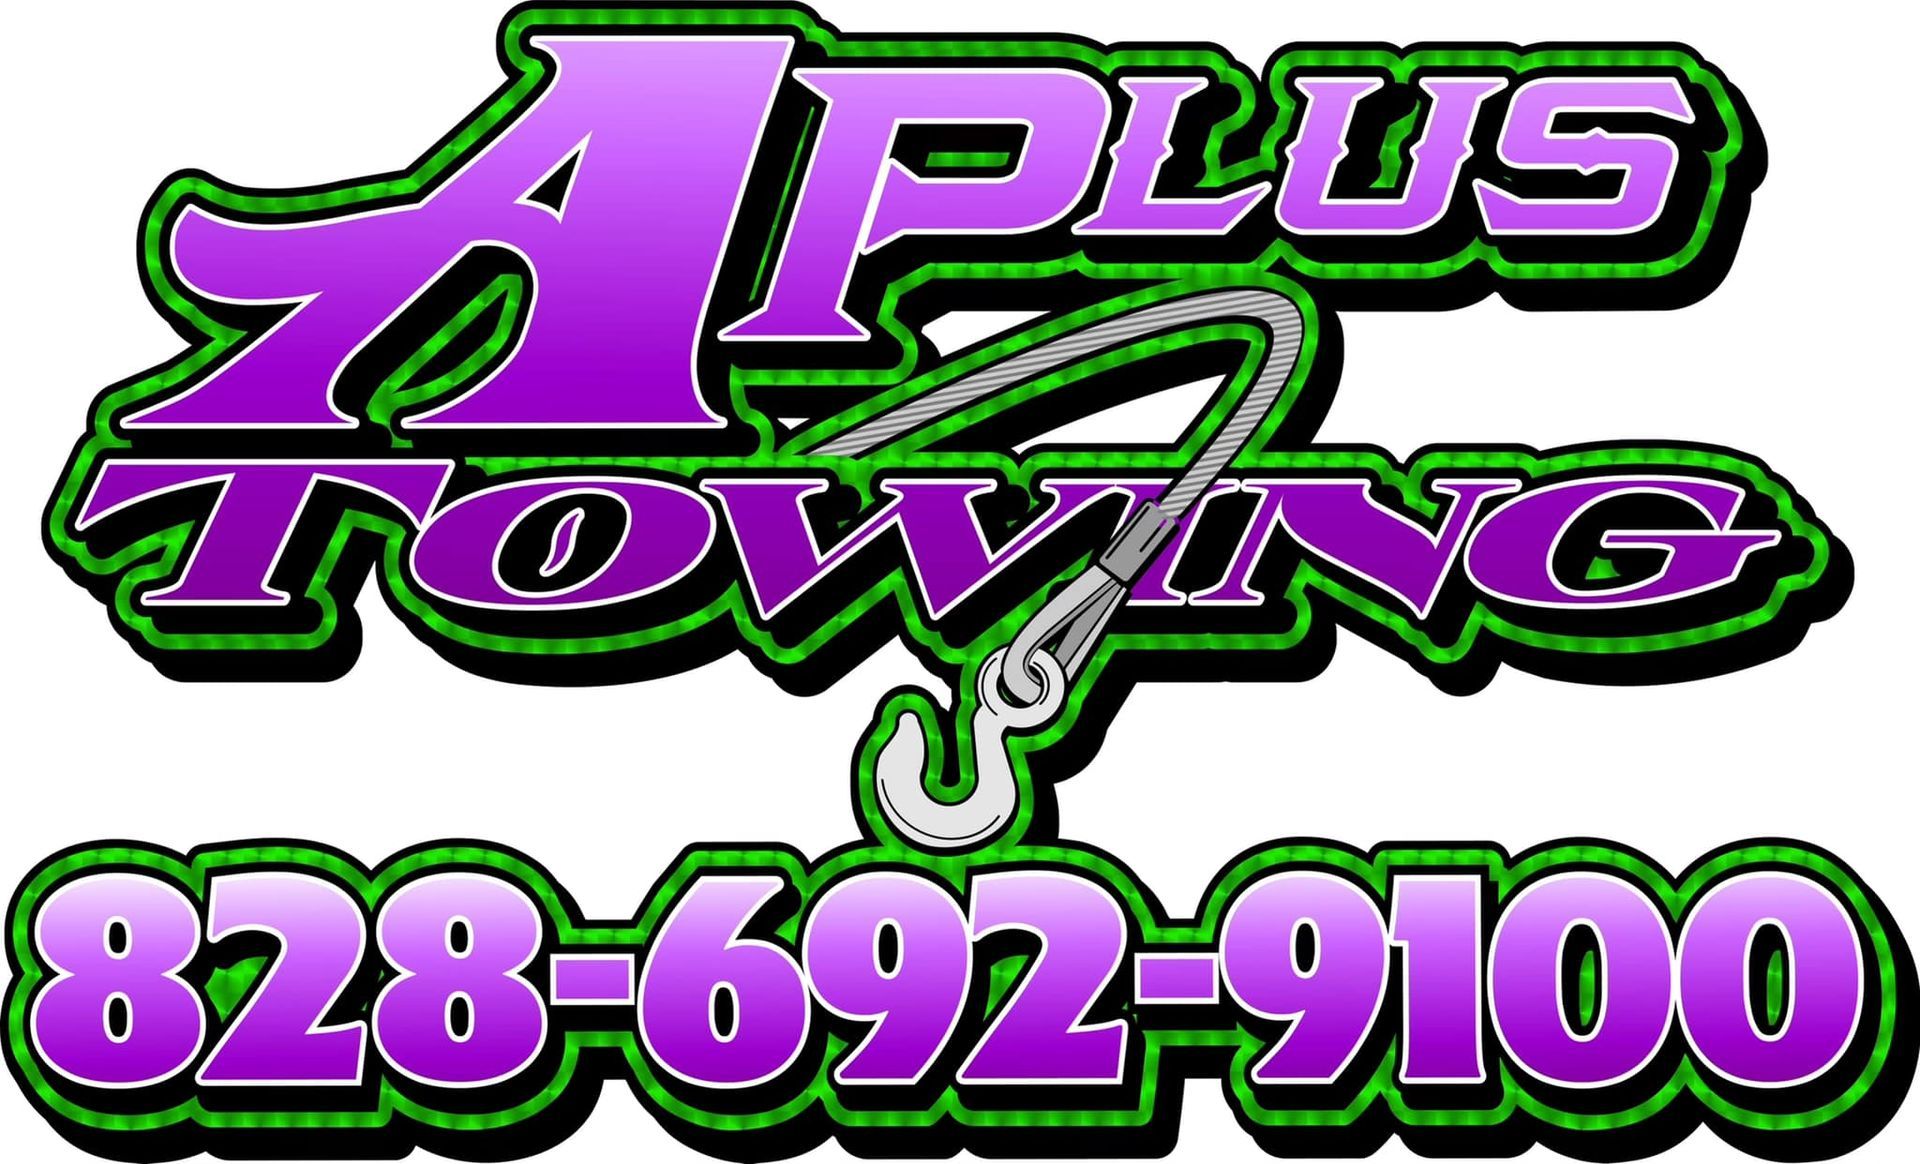 A Plus Towing